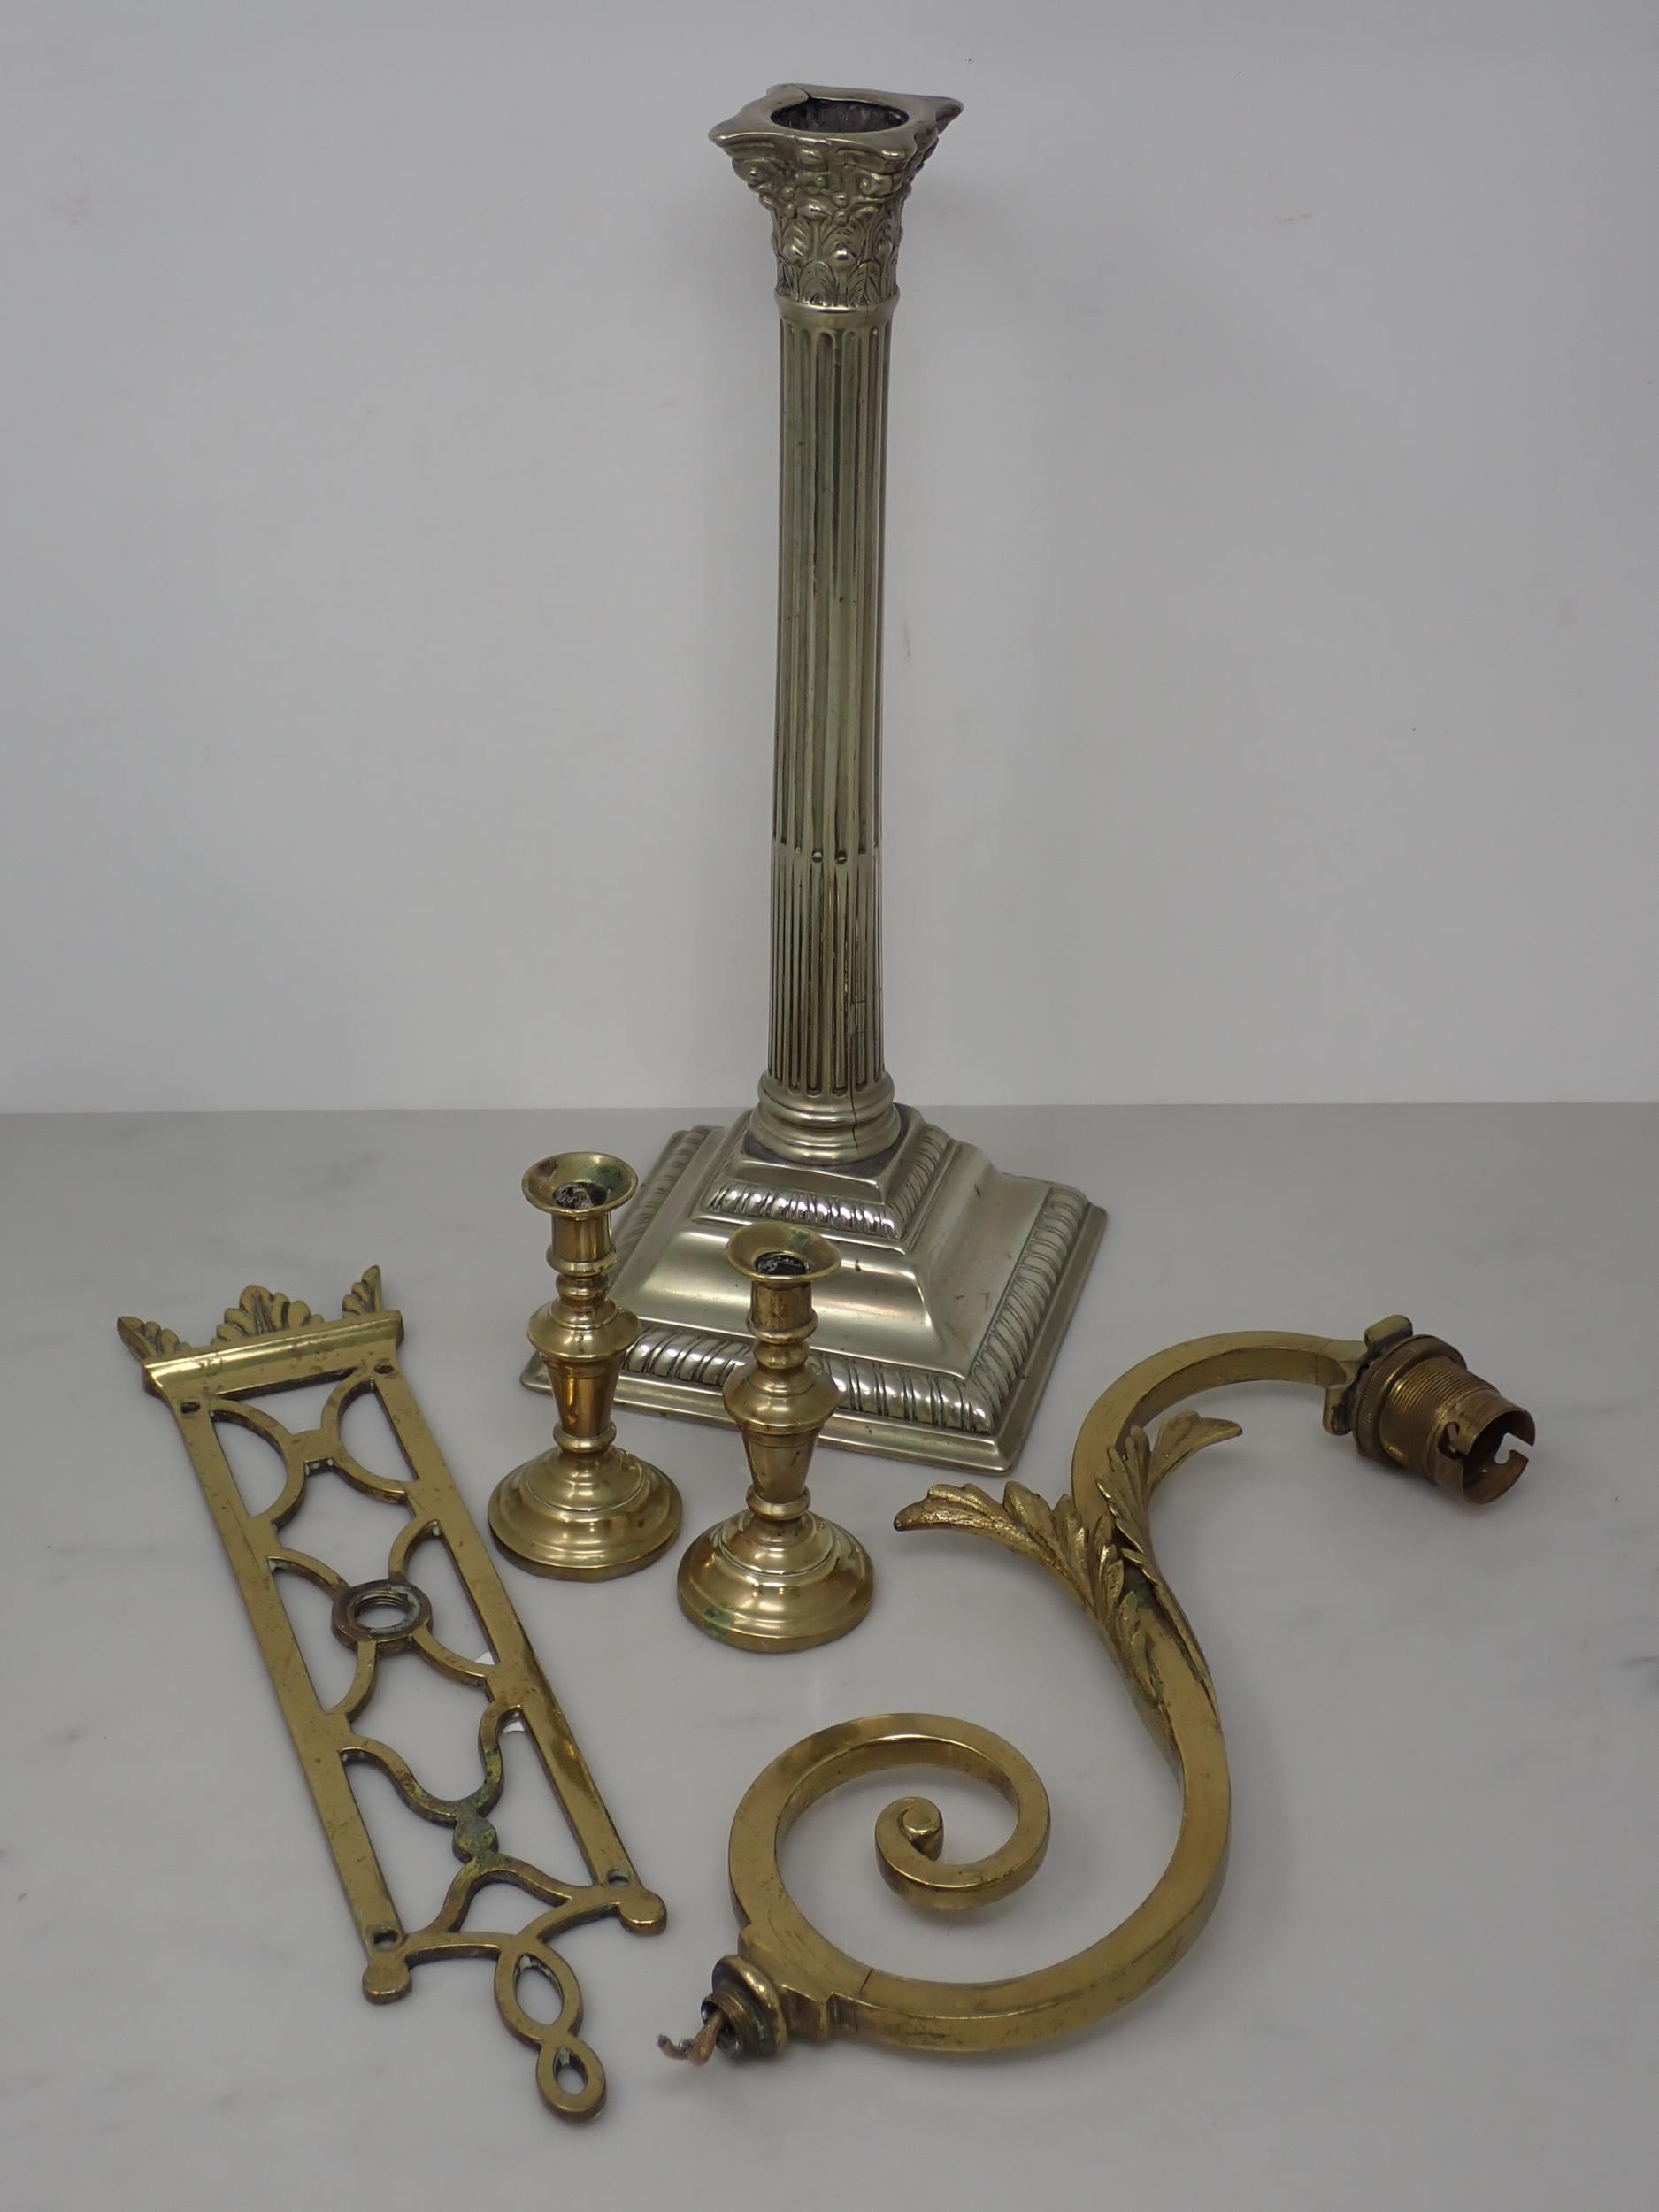 A Candlestick, possibly Paktong, with stop fluted column and square base 111/2in H, a pierced